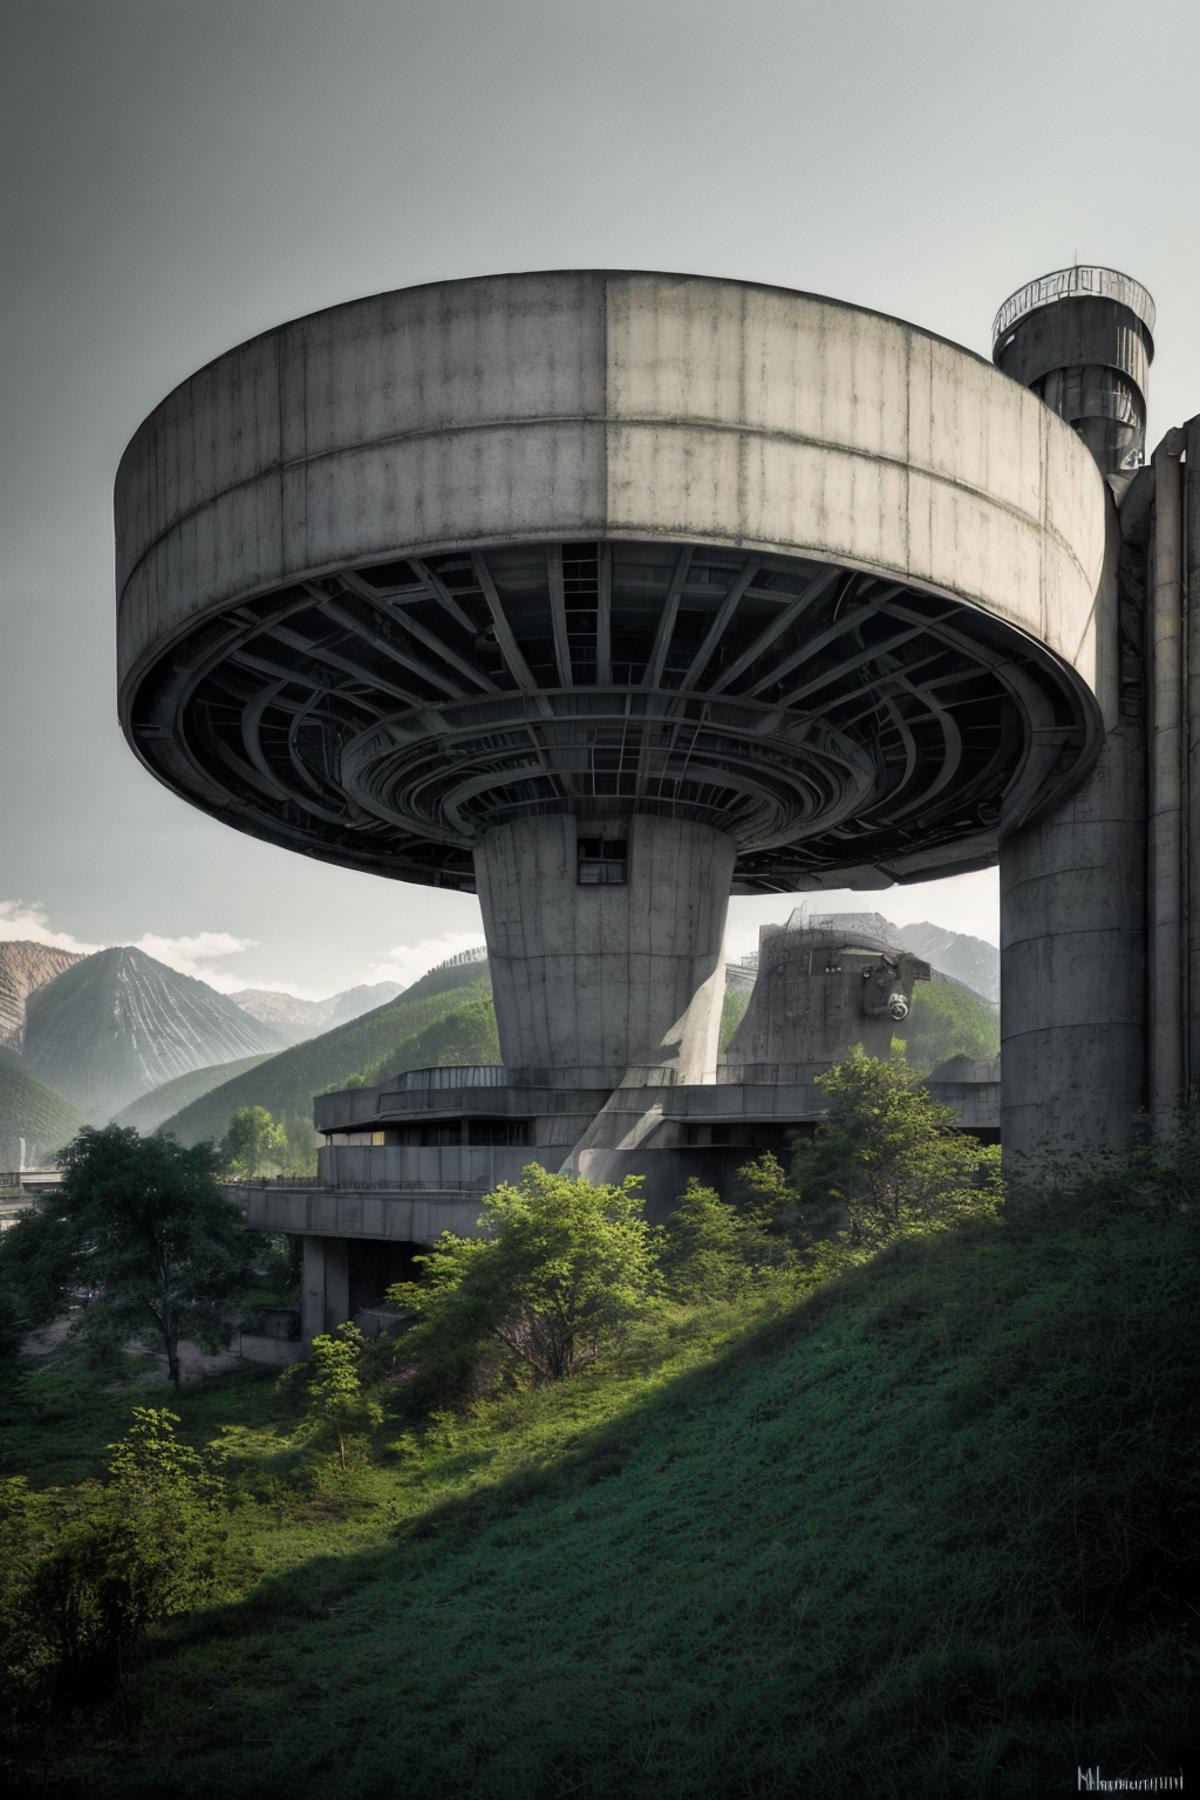 A large concrete structure with a circular top, surrounded by trees and mountains.